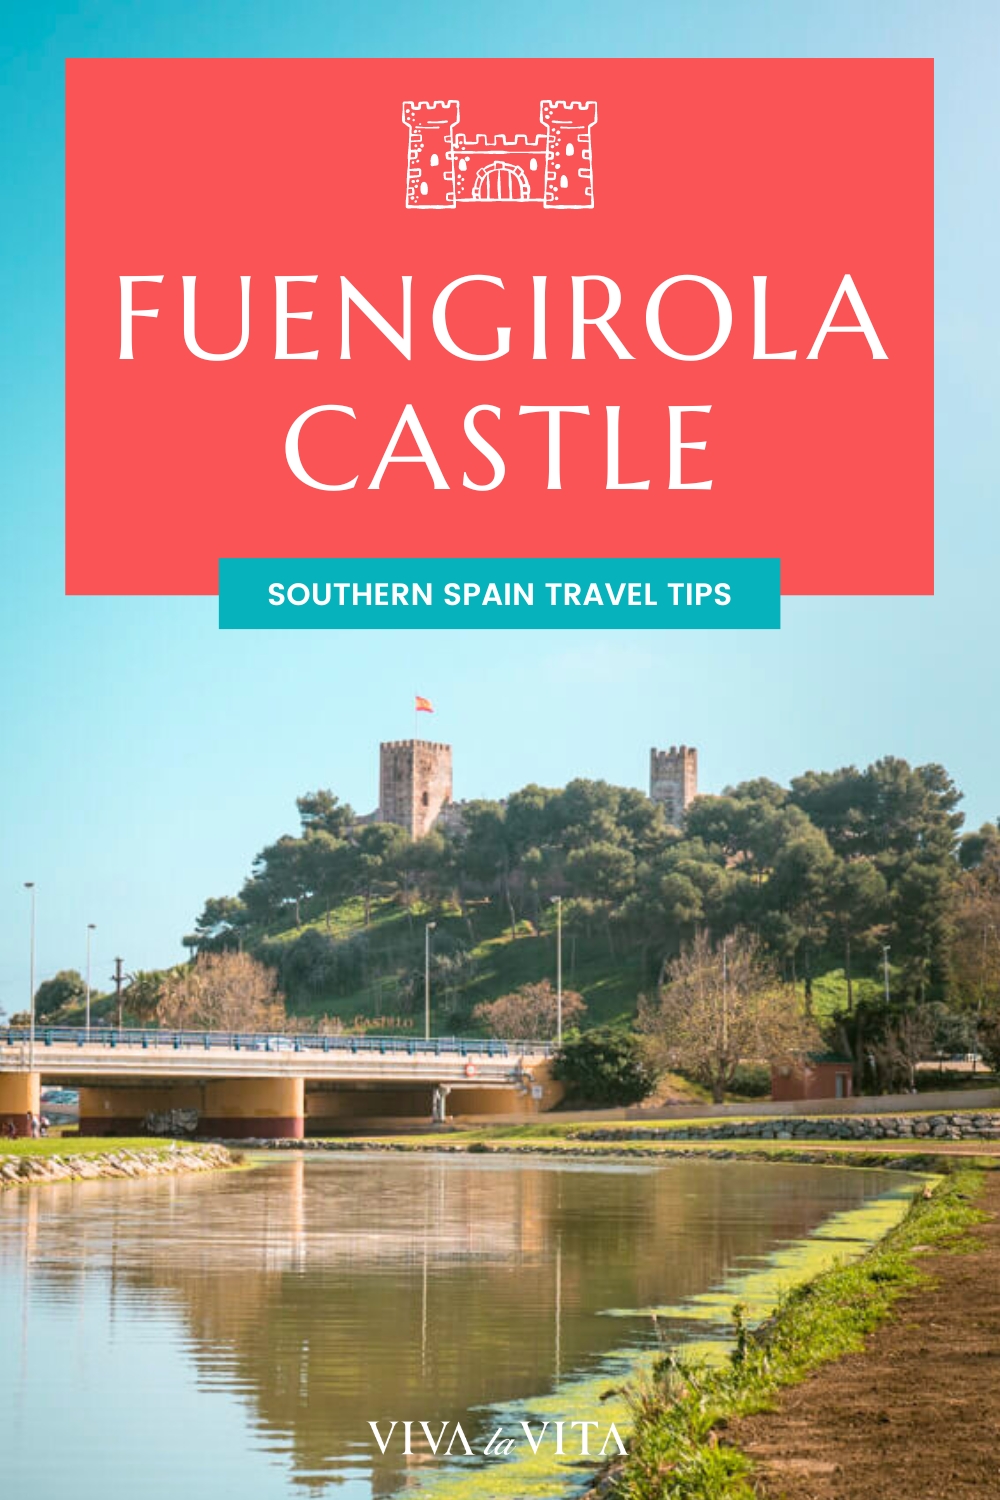 pinterest image showing fuengirola castle and a headline - fuengirola castle, southern spain travel tips